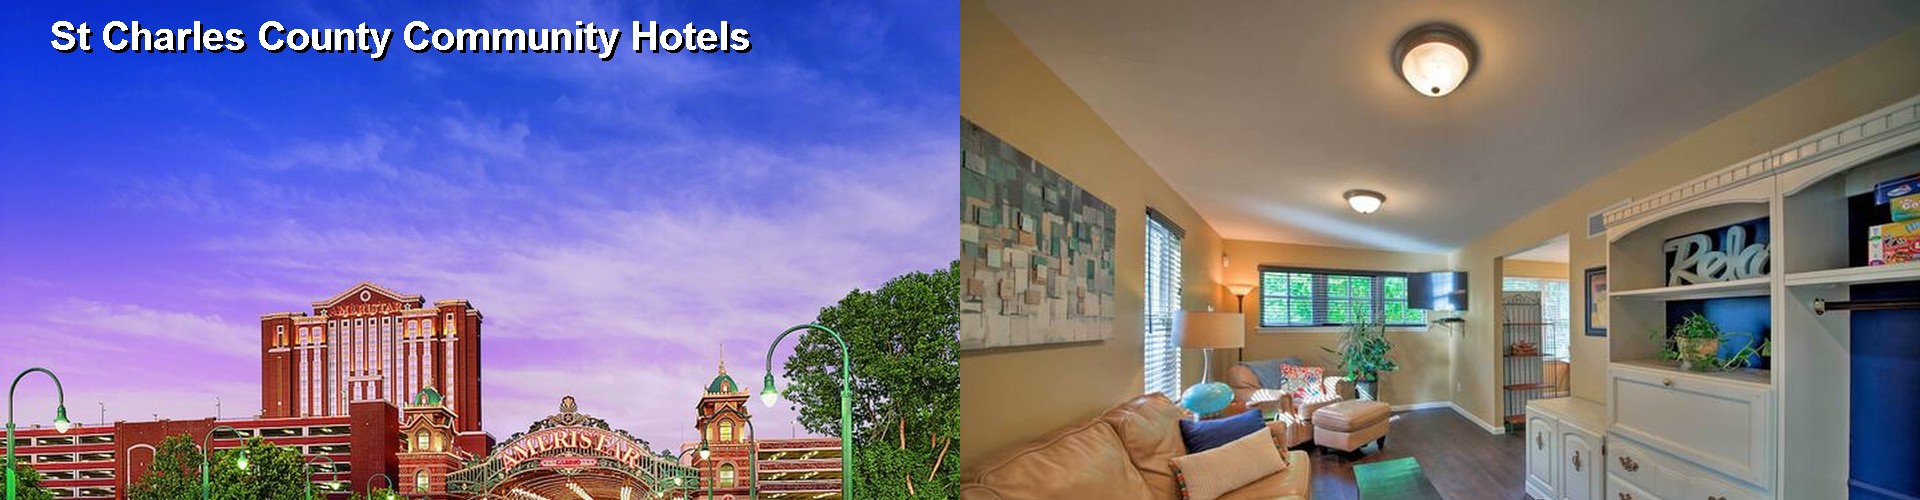 4 Best Hotels near St Charles County Community